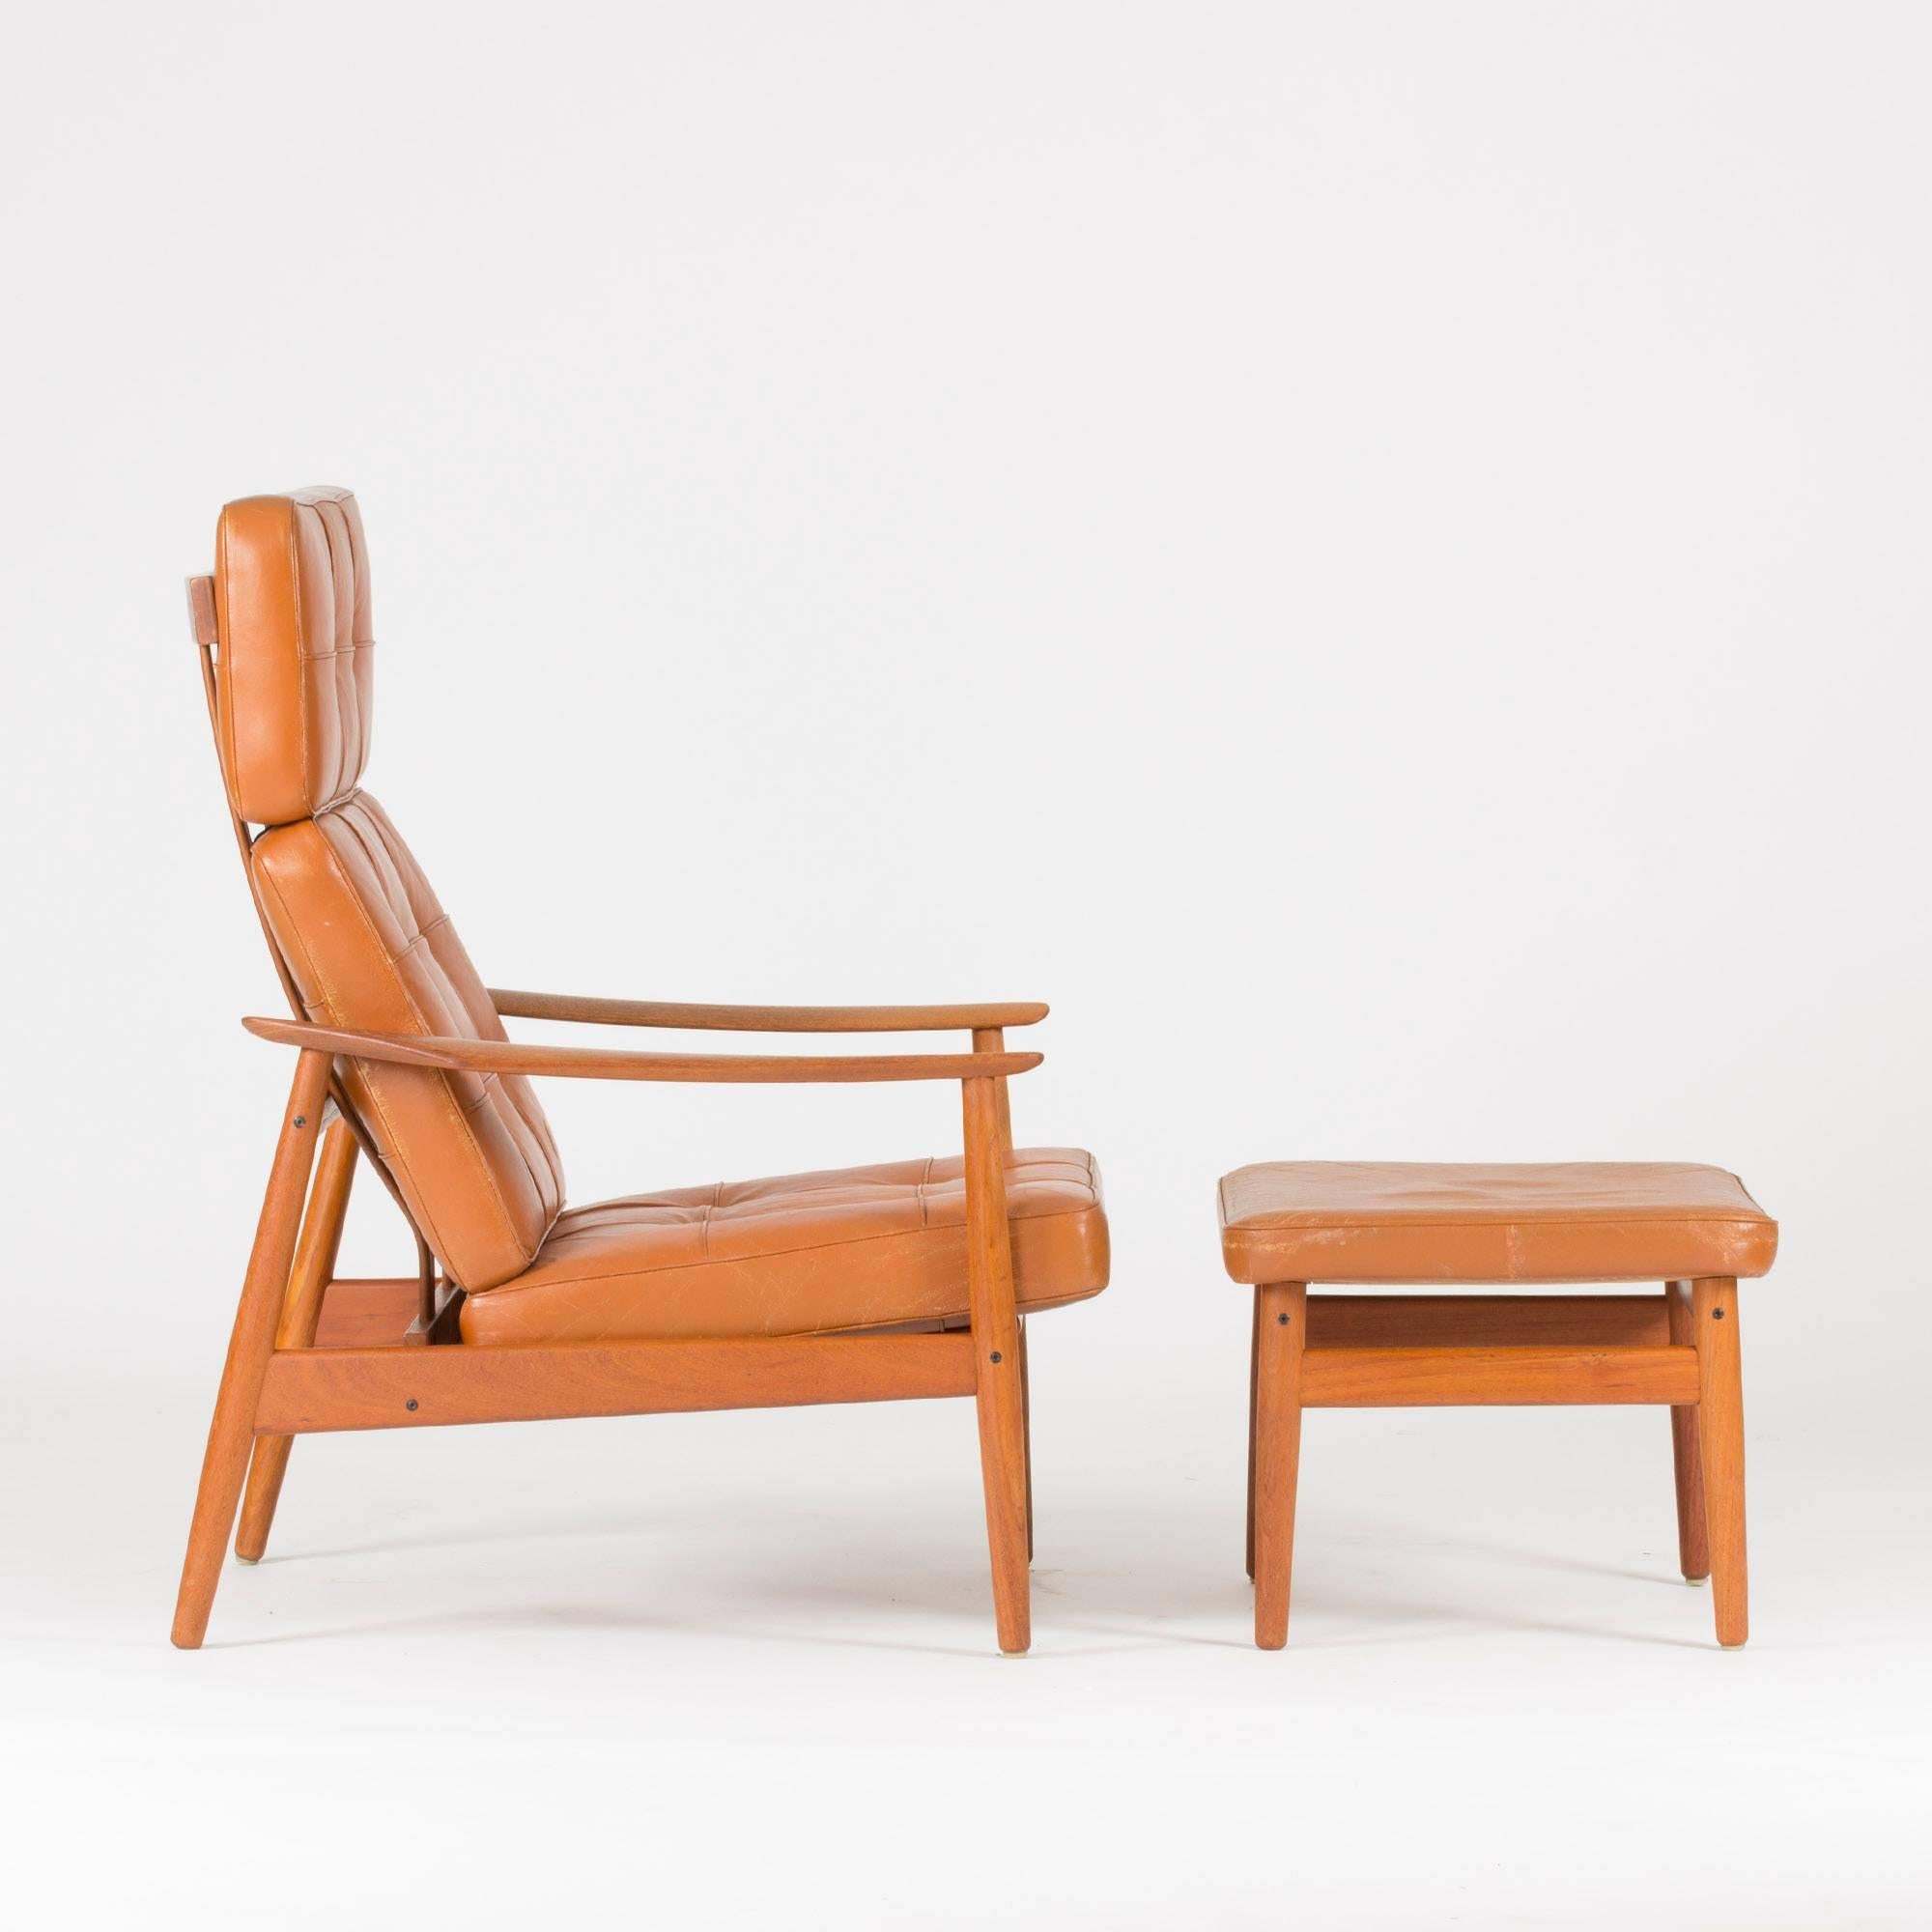 Teak and leather lounge chair with ottoman by Arne Vodder, made for relaxation. Beautifully carved armrests.